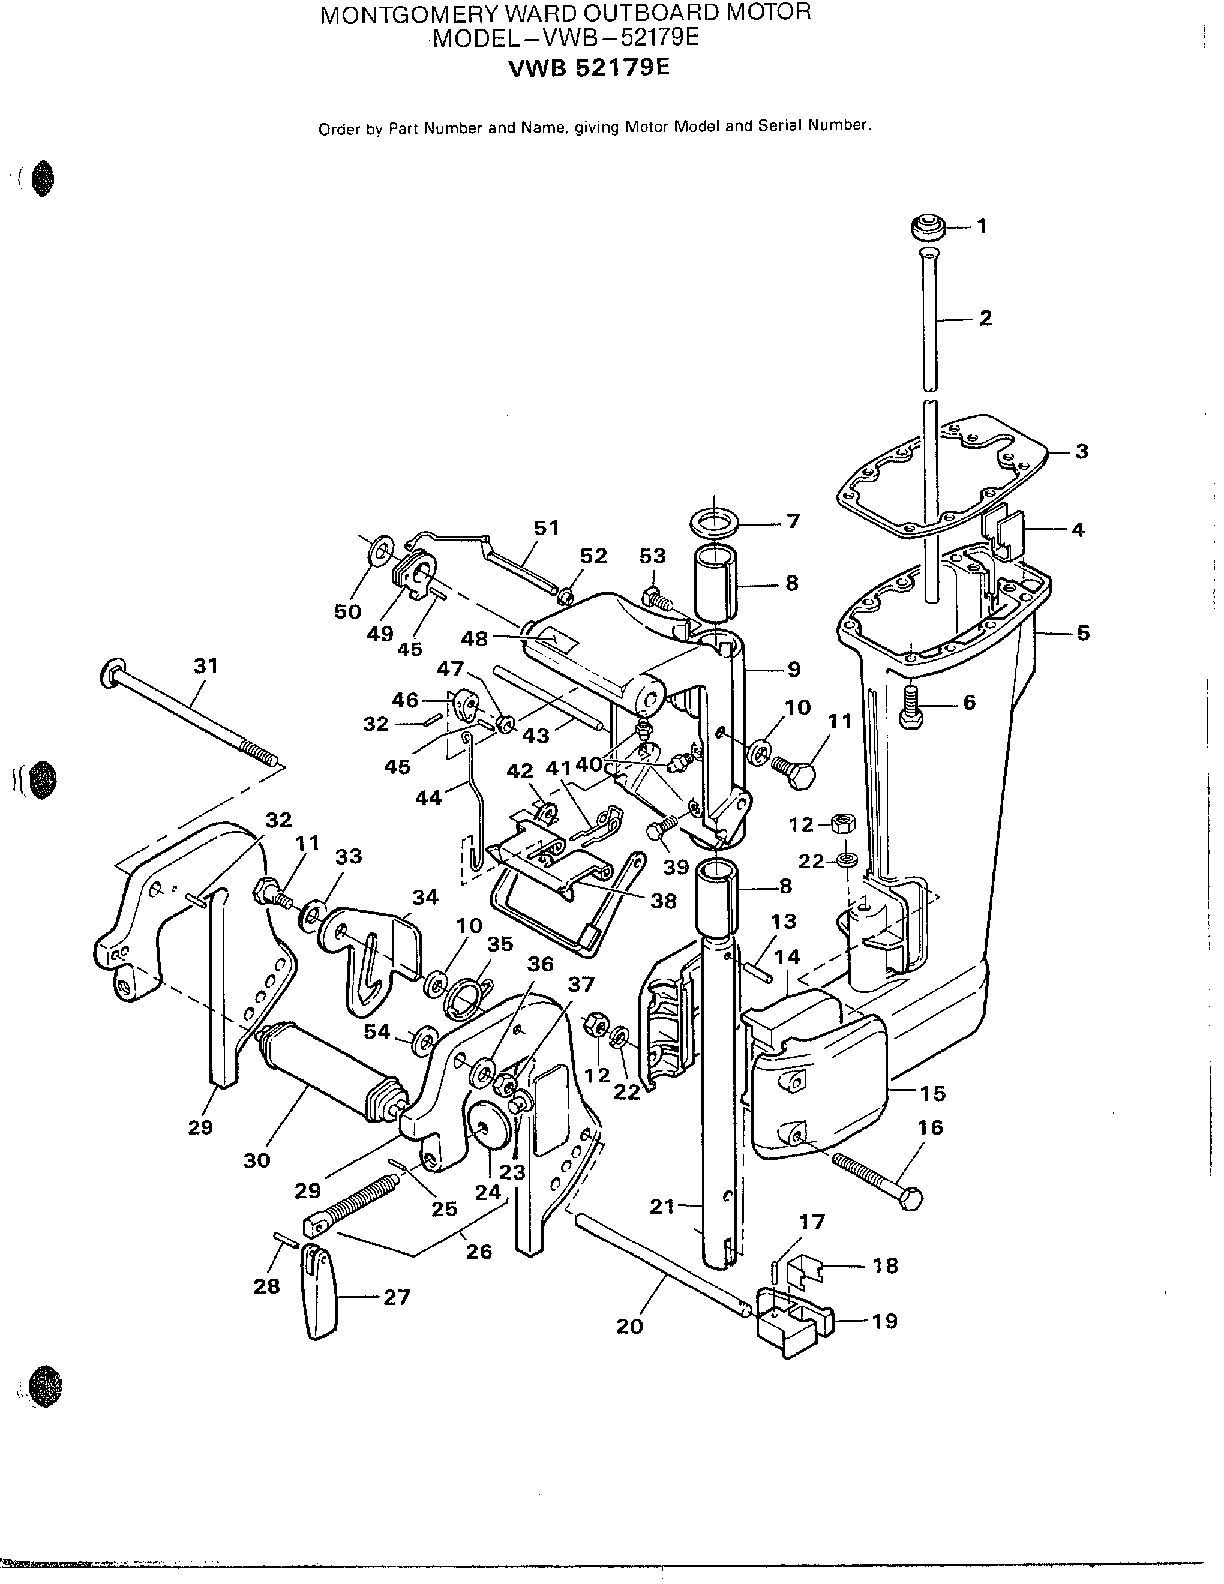 Outboard Motor  Motor Leg Page 2 Diagram  U0026 Parts List For